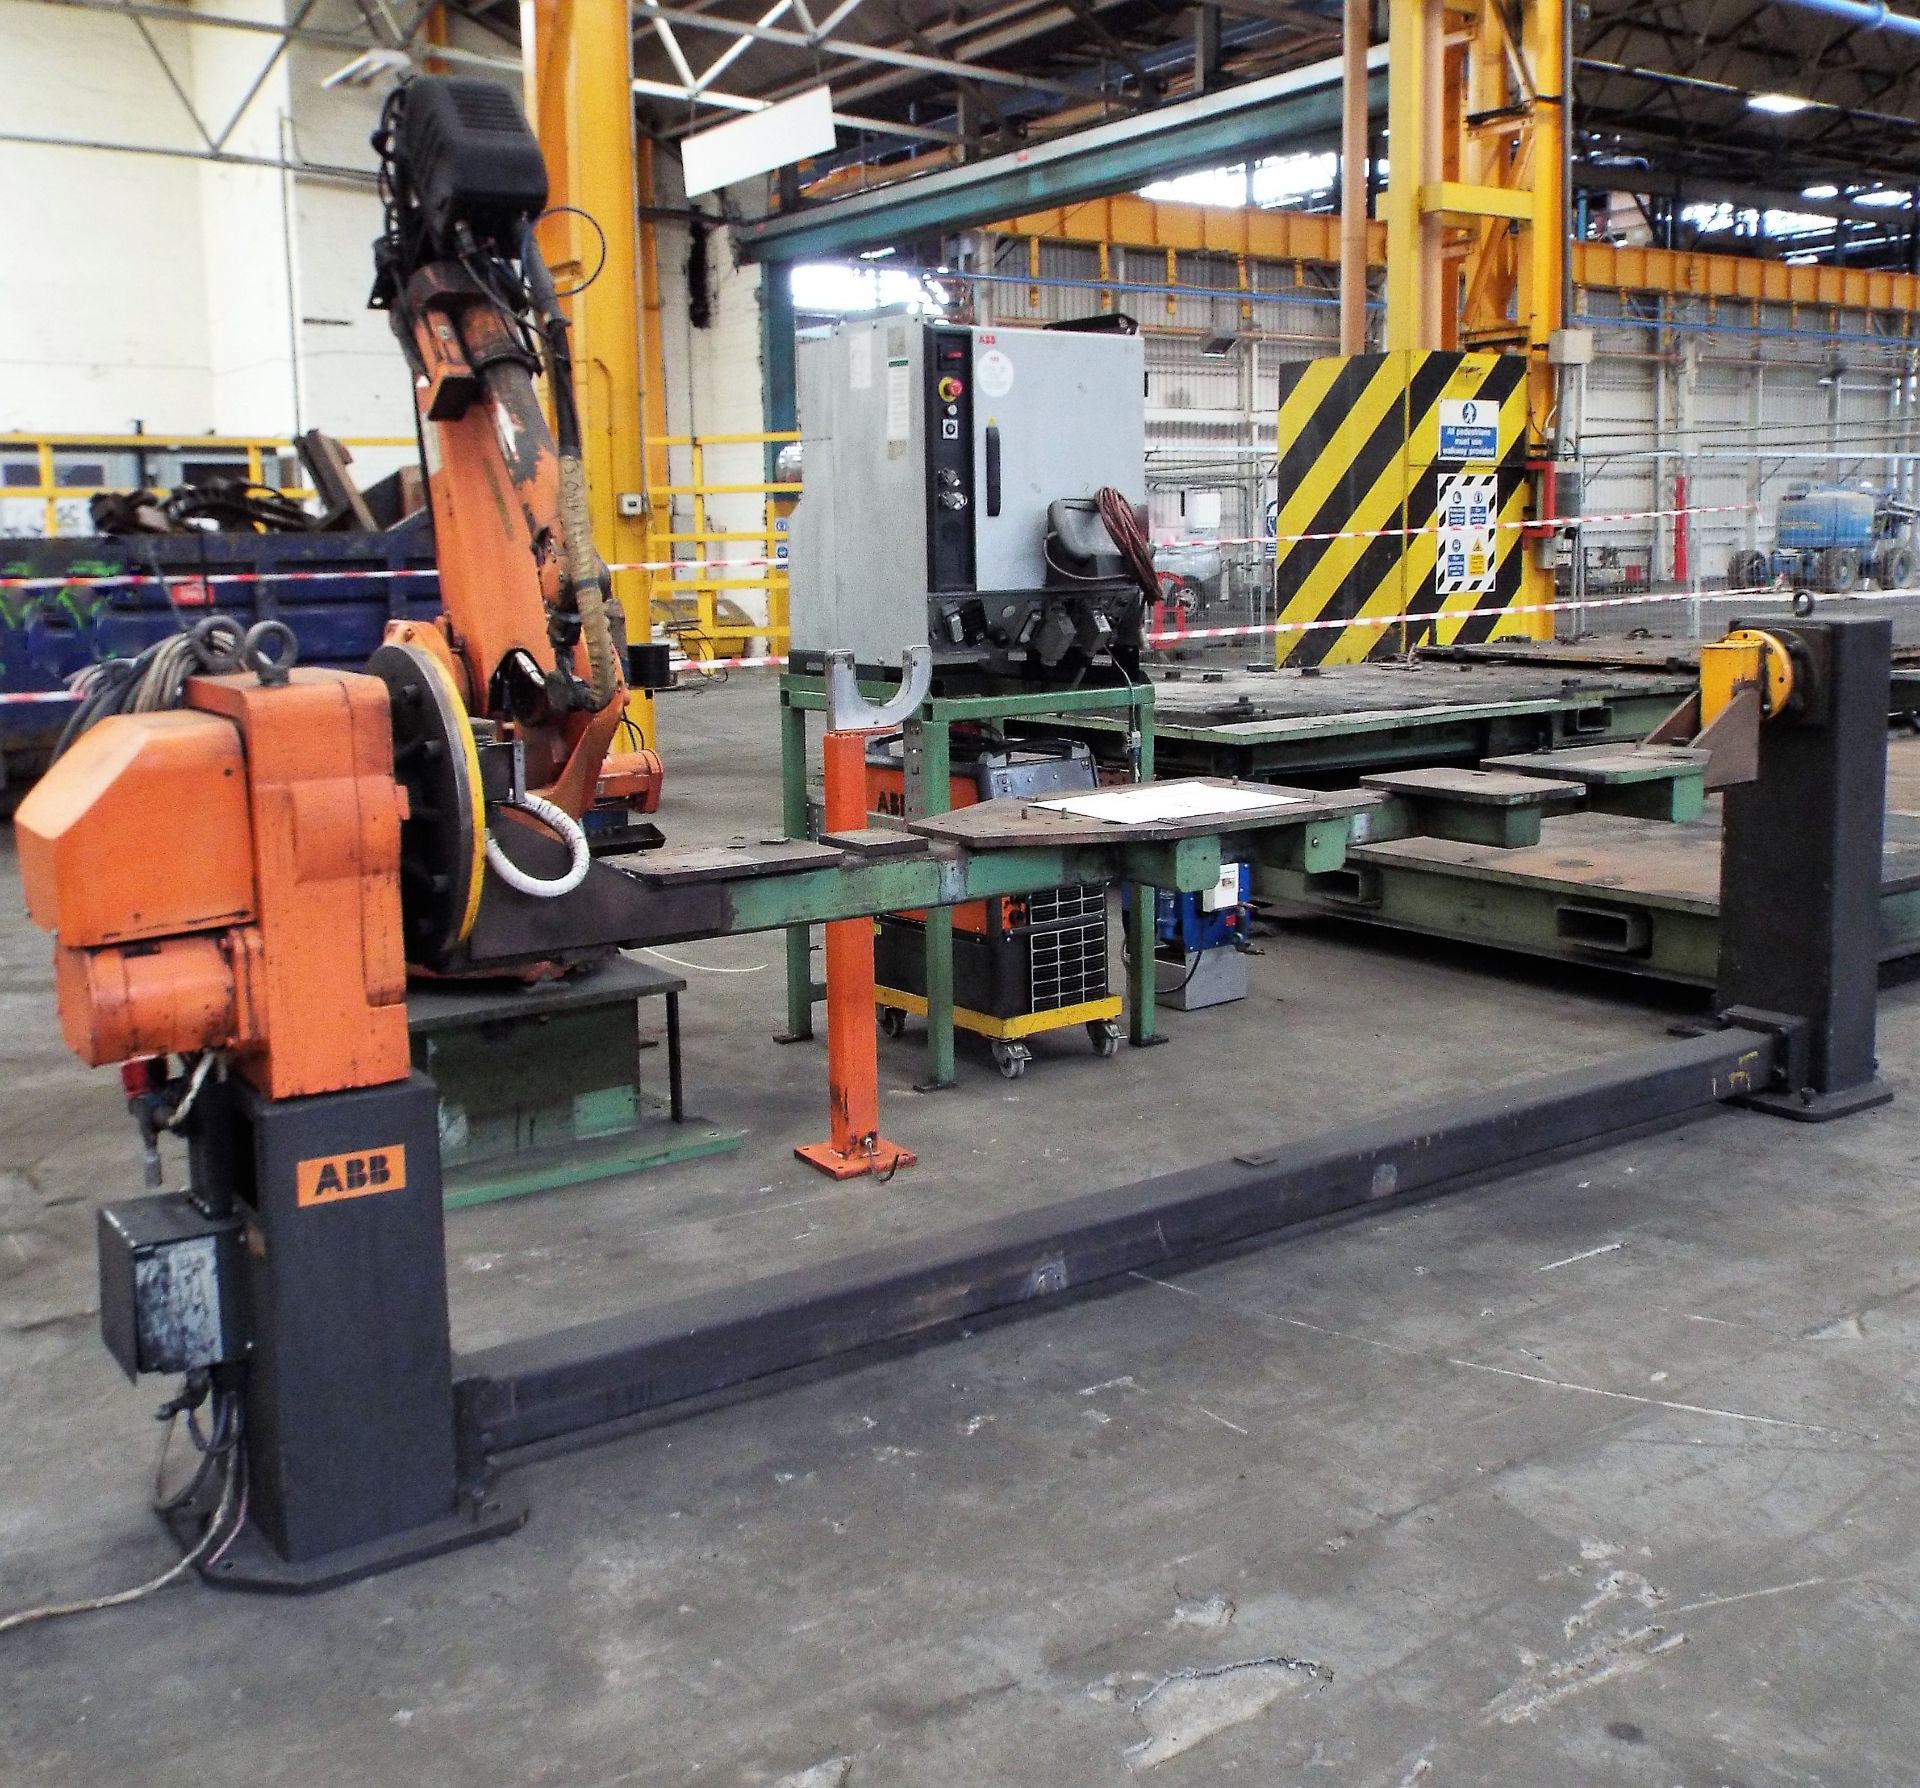 Walk Through Video of The ABB Mig Welding Robots,Support Equipment and ESAB Welding Sets.